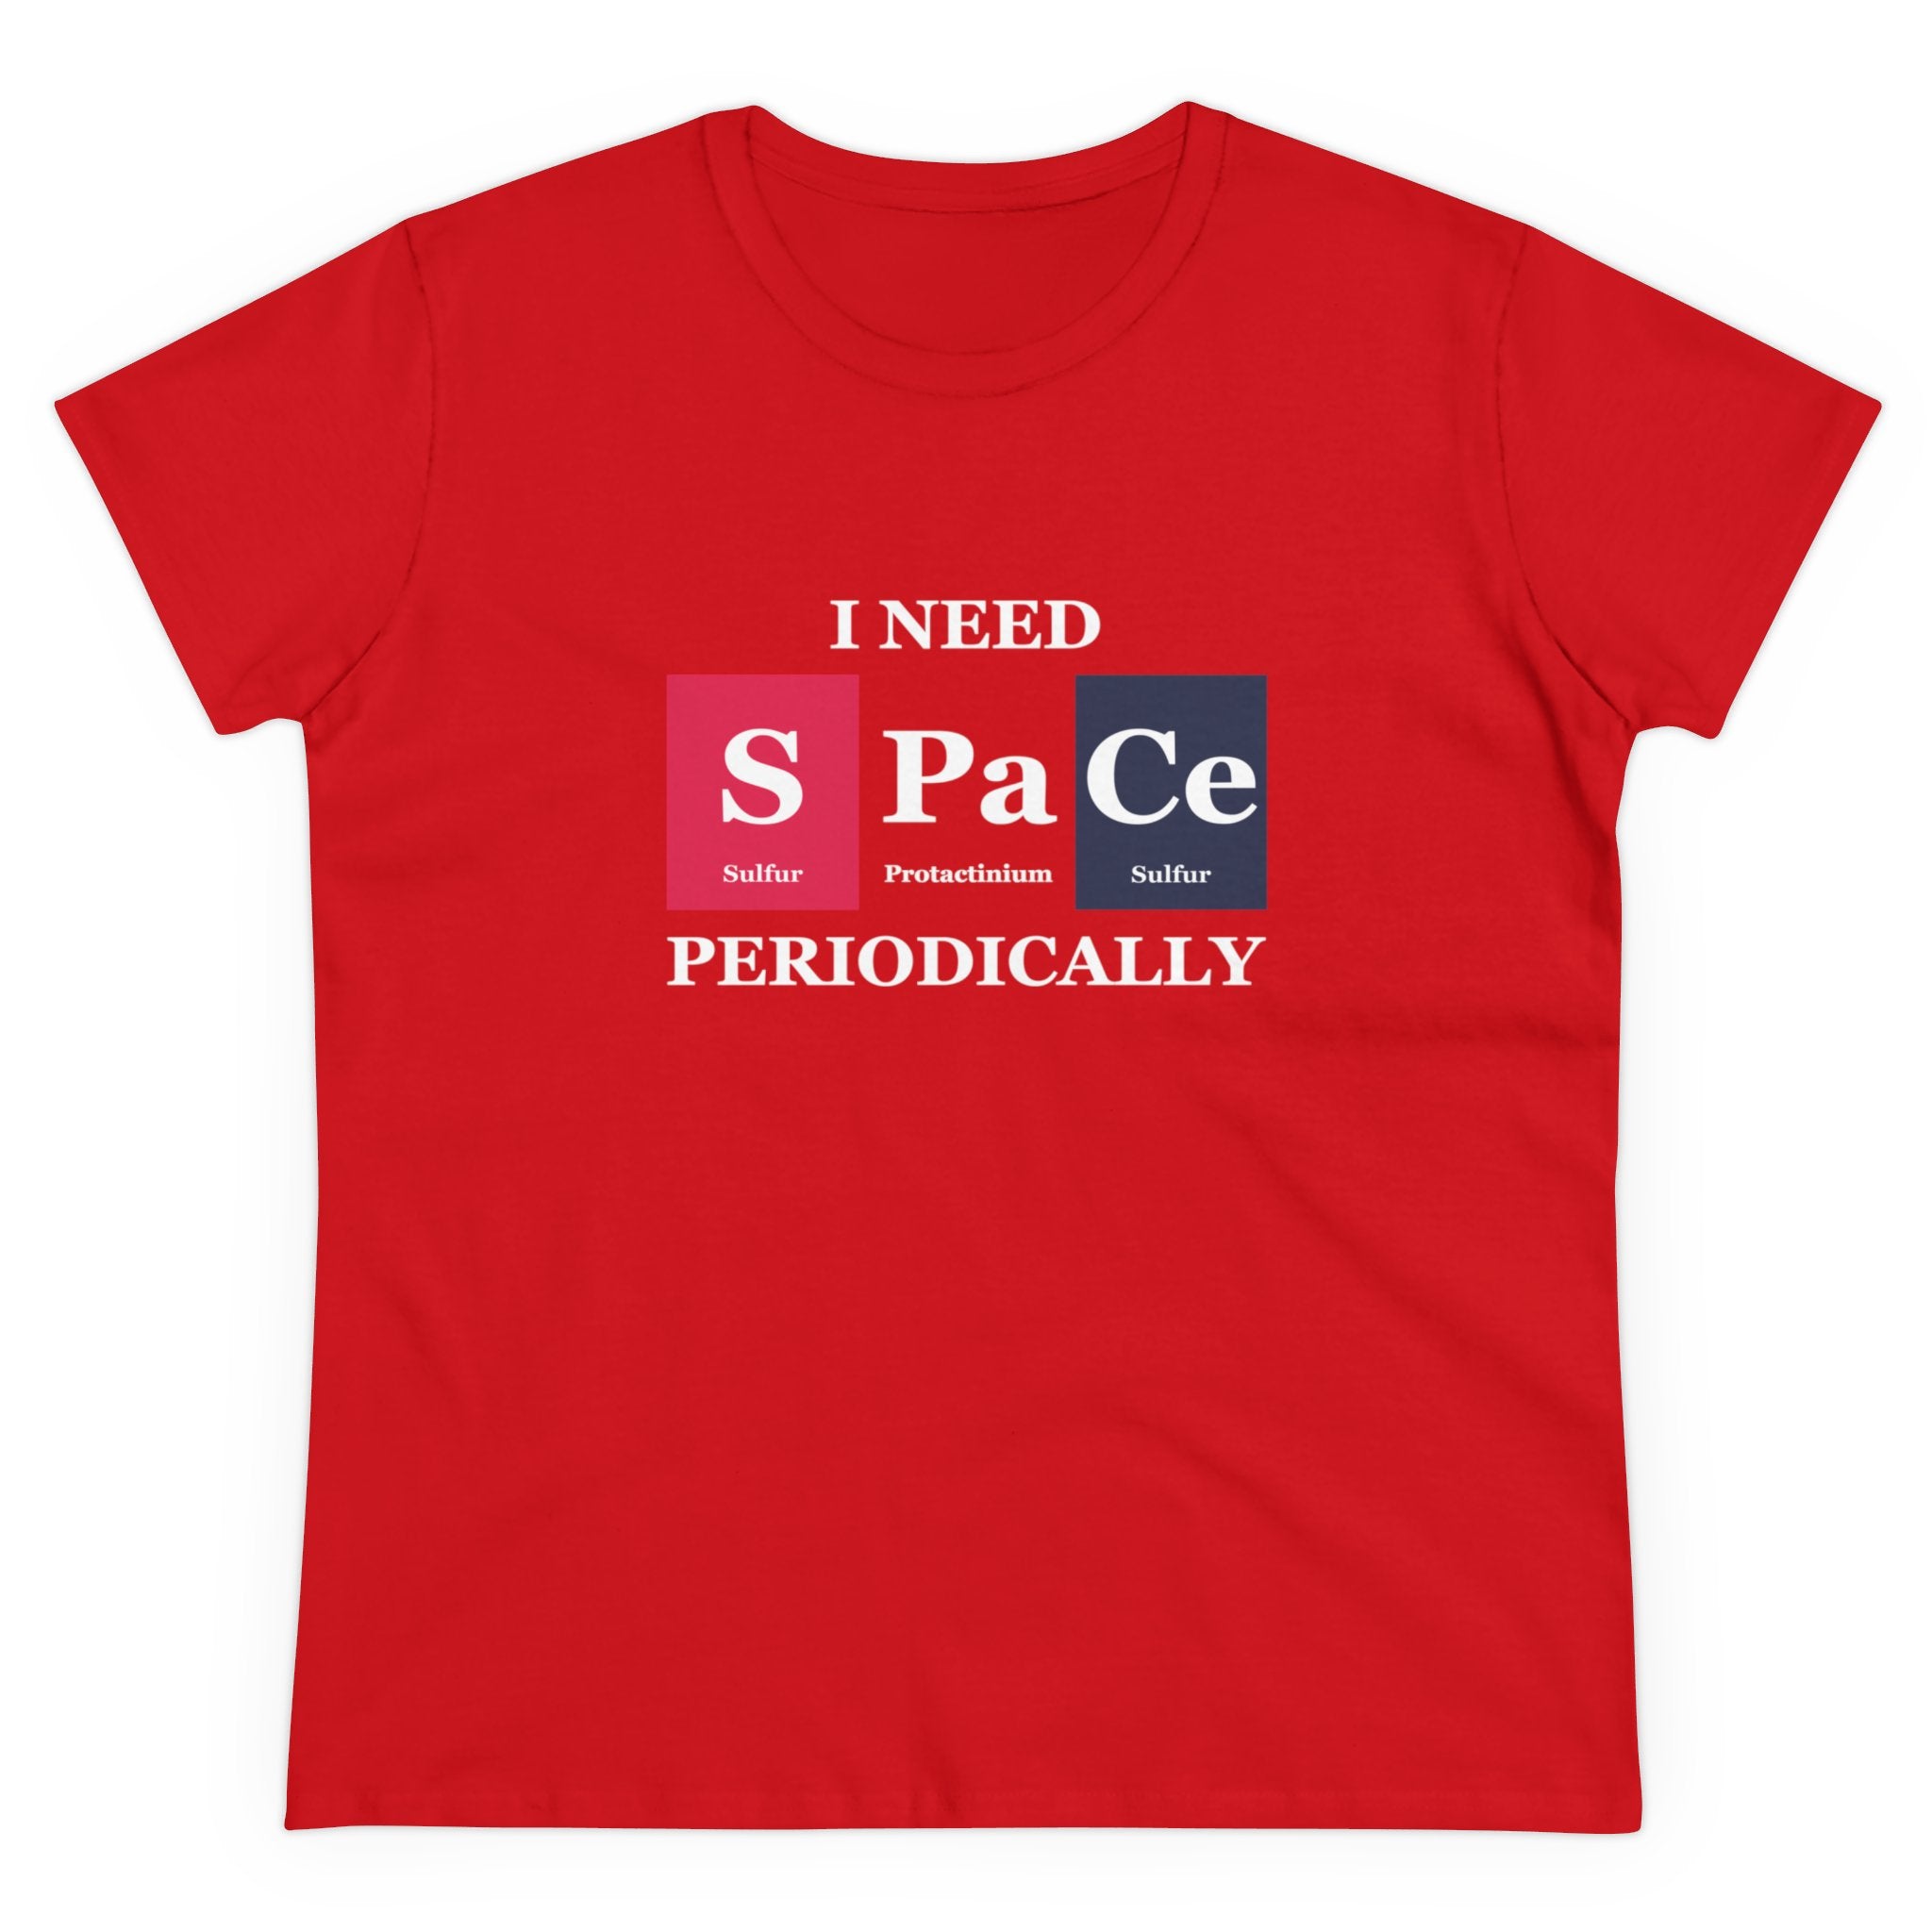 Red S-Pa-Ce - Women's Tee featuring the phrase "I need space periodically," styled with elements from the periodic table symbolizing sulfur, protactinium, and cerium. Enjoy the perfect blend of style and comfort with this unique S-Pa-Ce design.